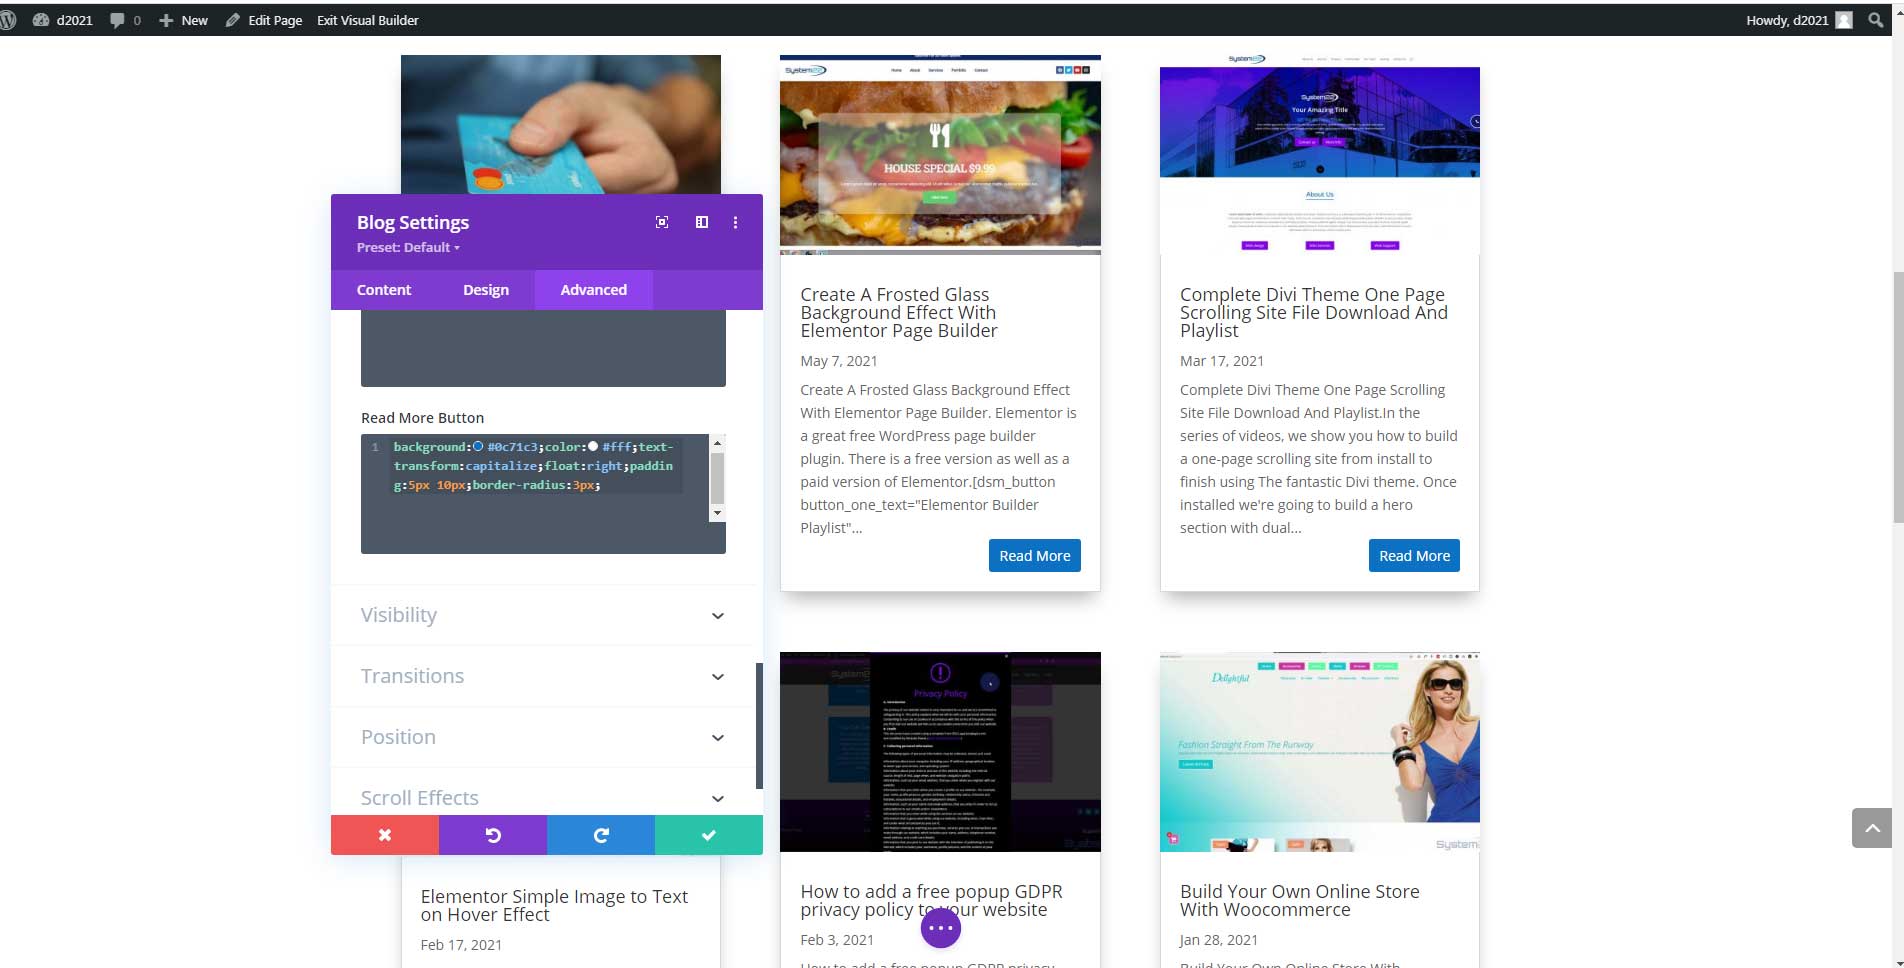 Divi Theme Customize Your Blog Read More Button With CSS